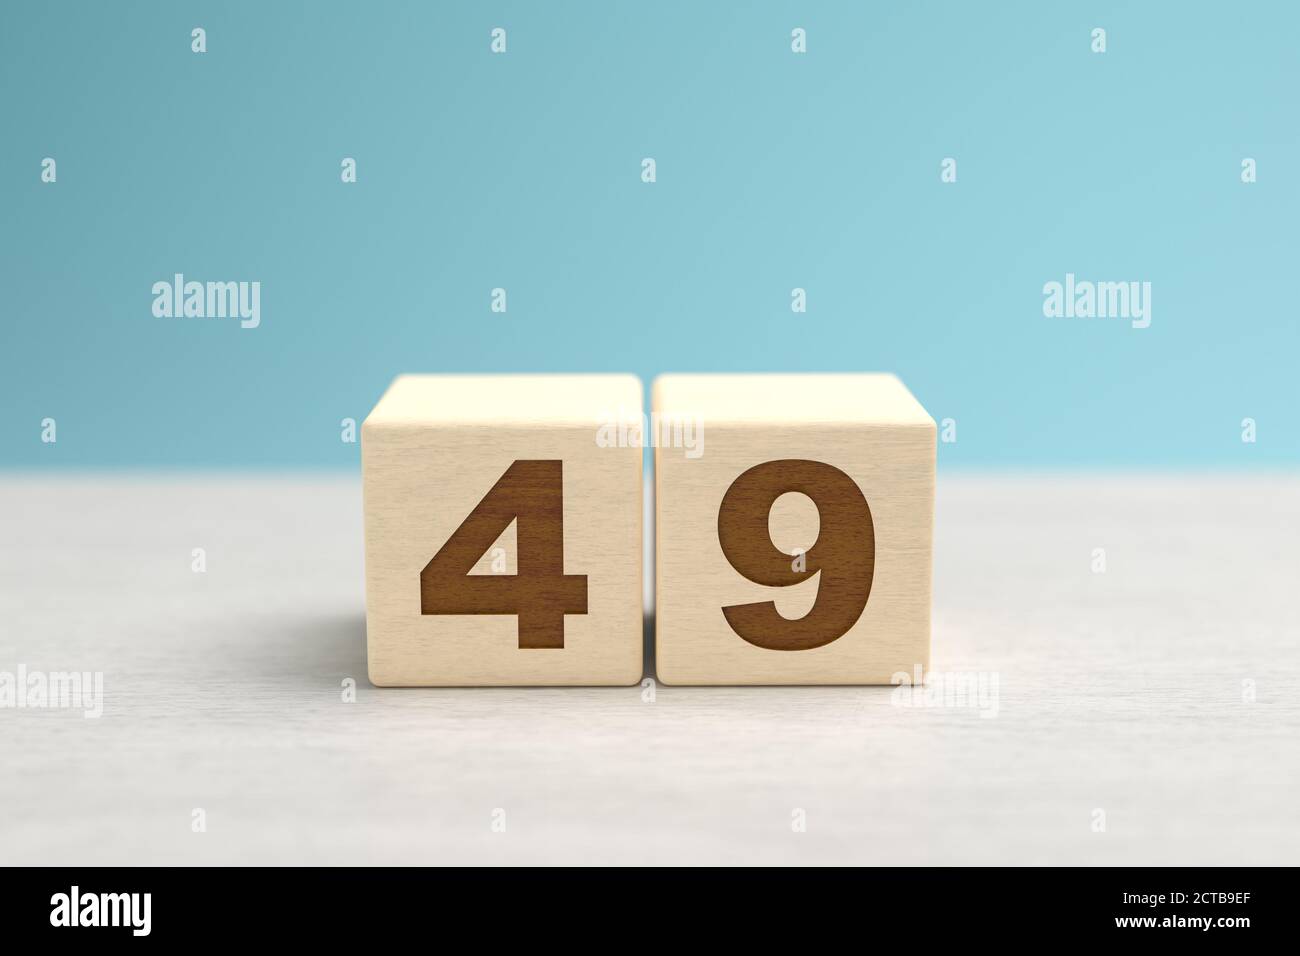 Wooden toy blocks forming the number 49. Stock Photo